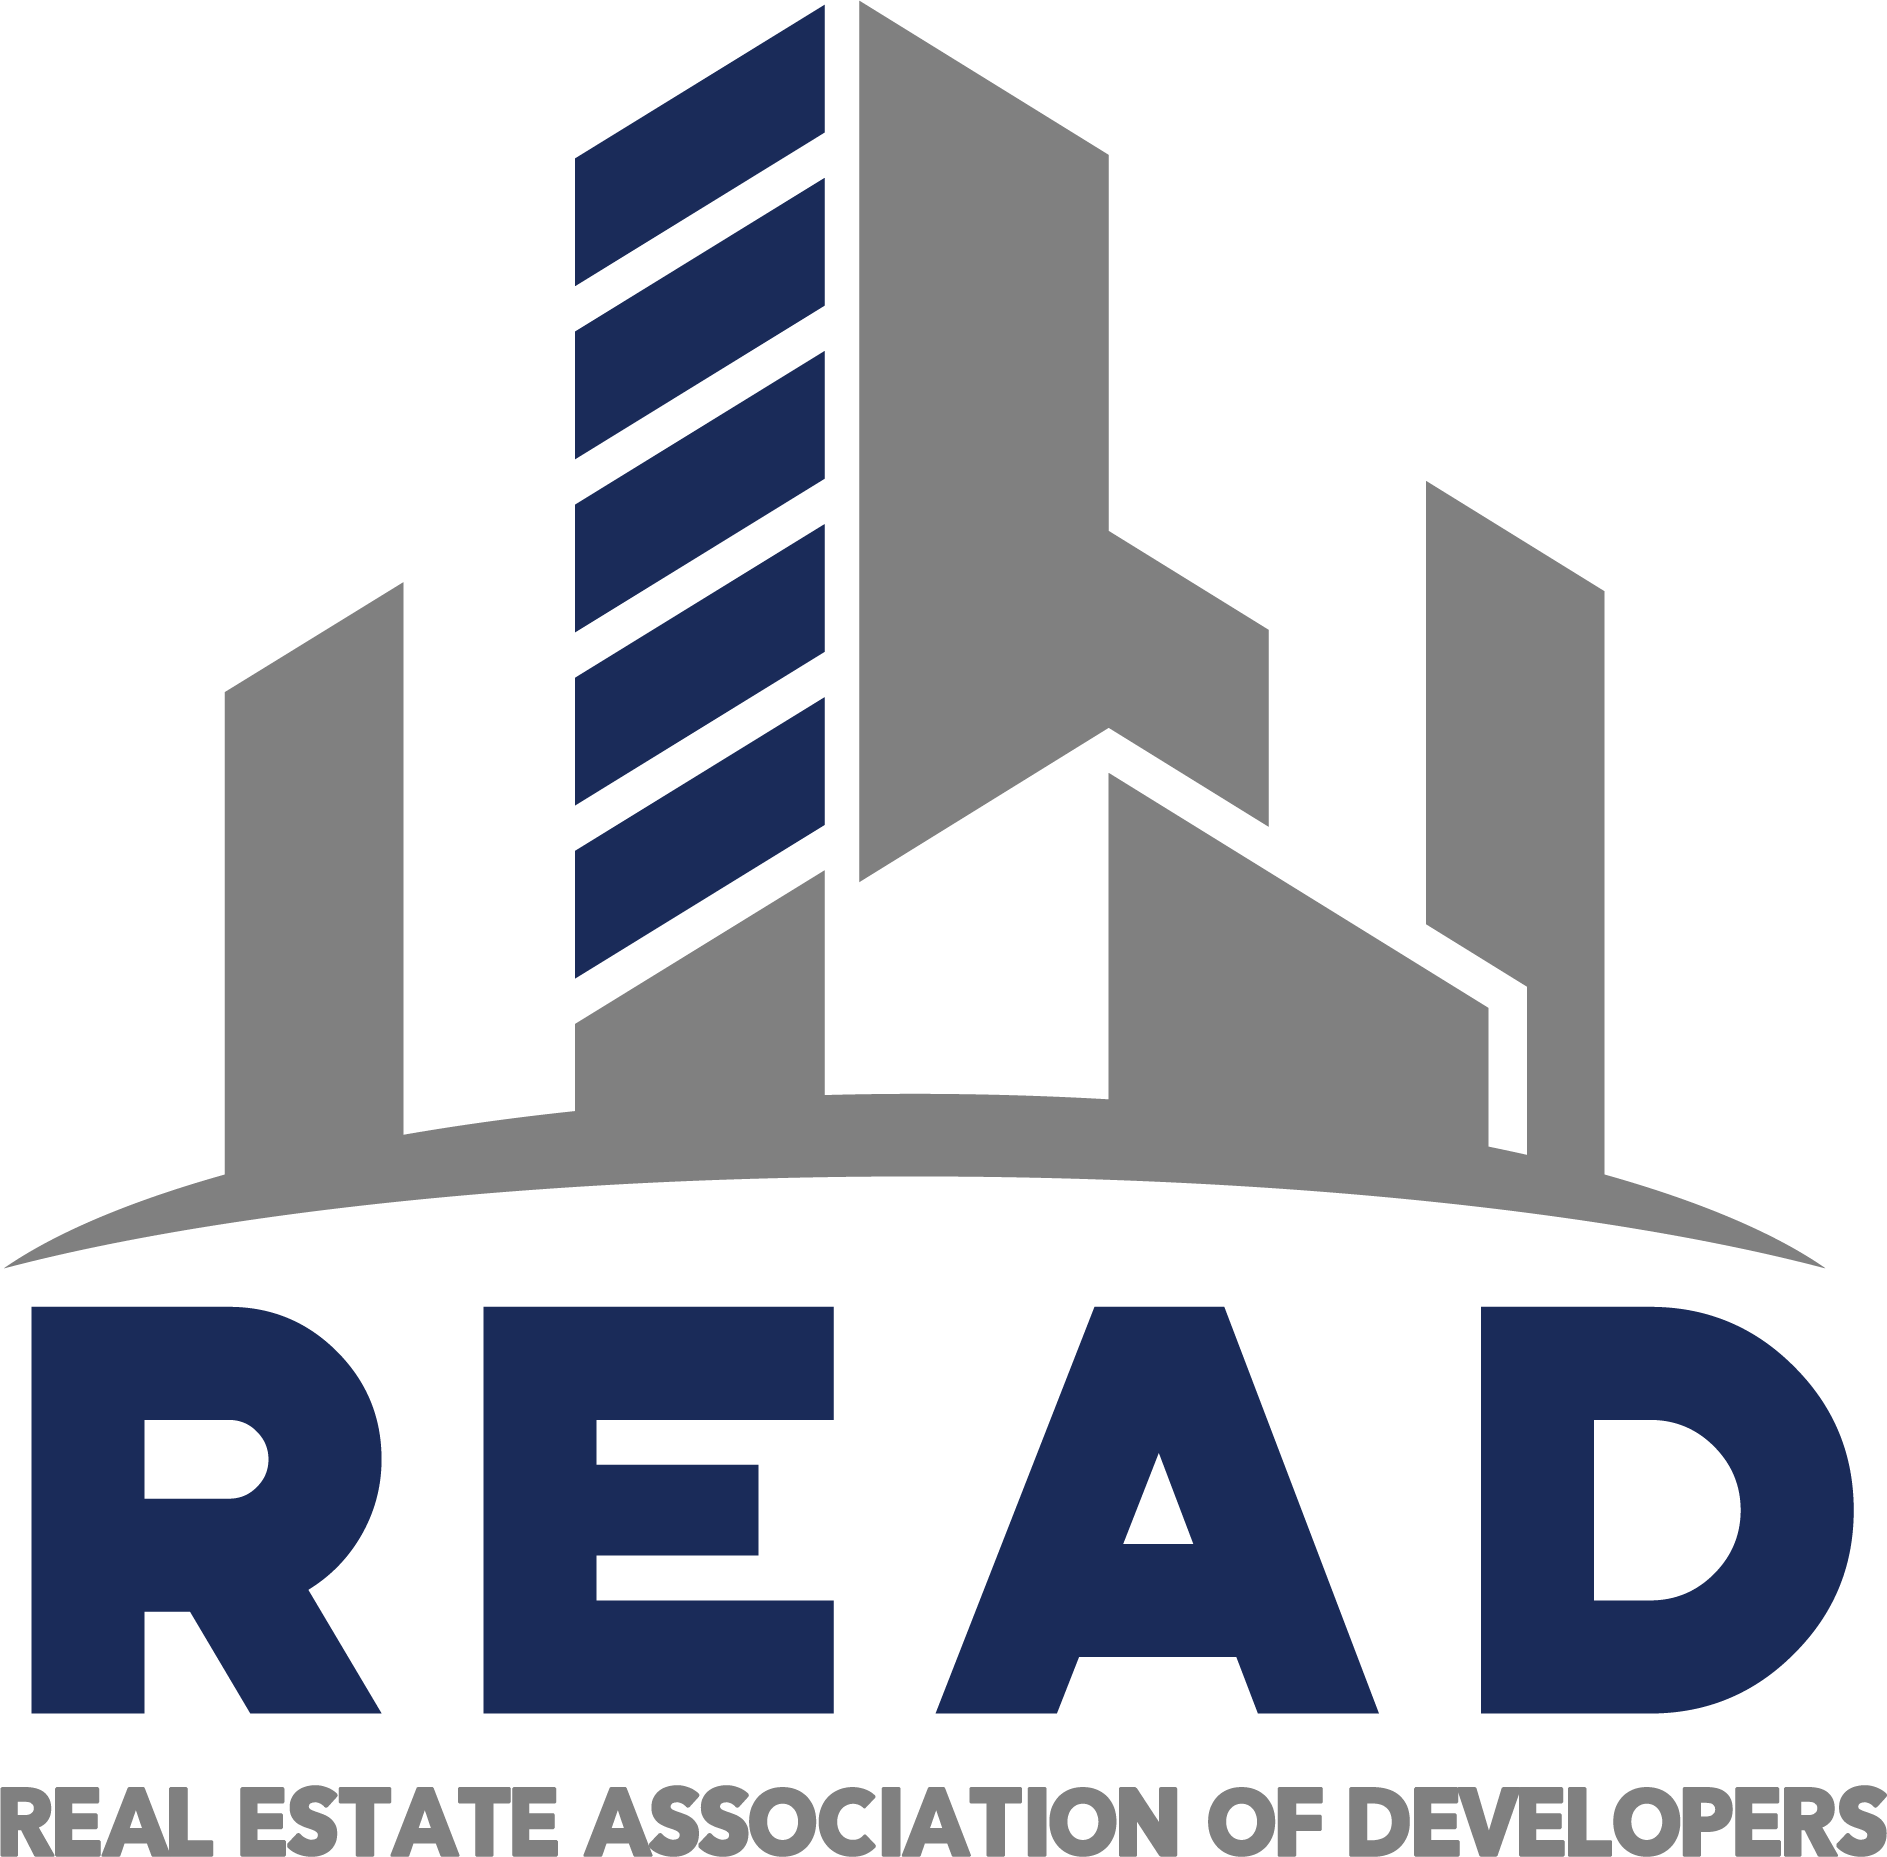 Real Estate Association of Developers (READ) Monthly Meeting